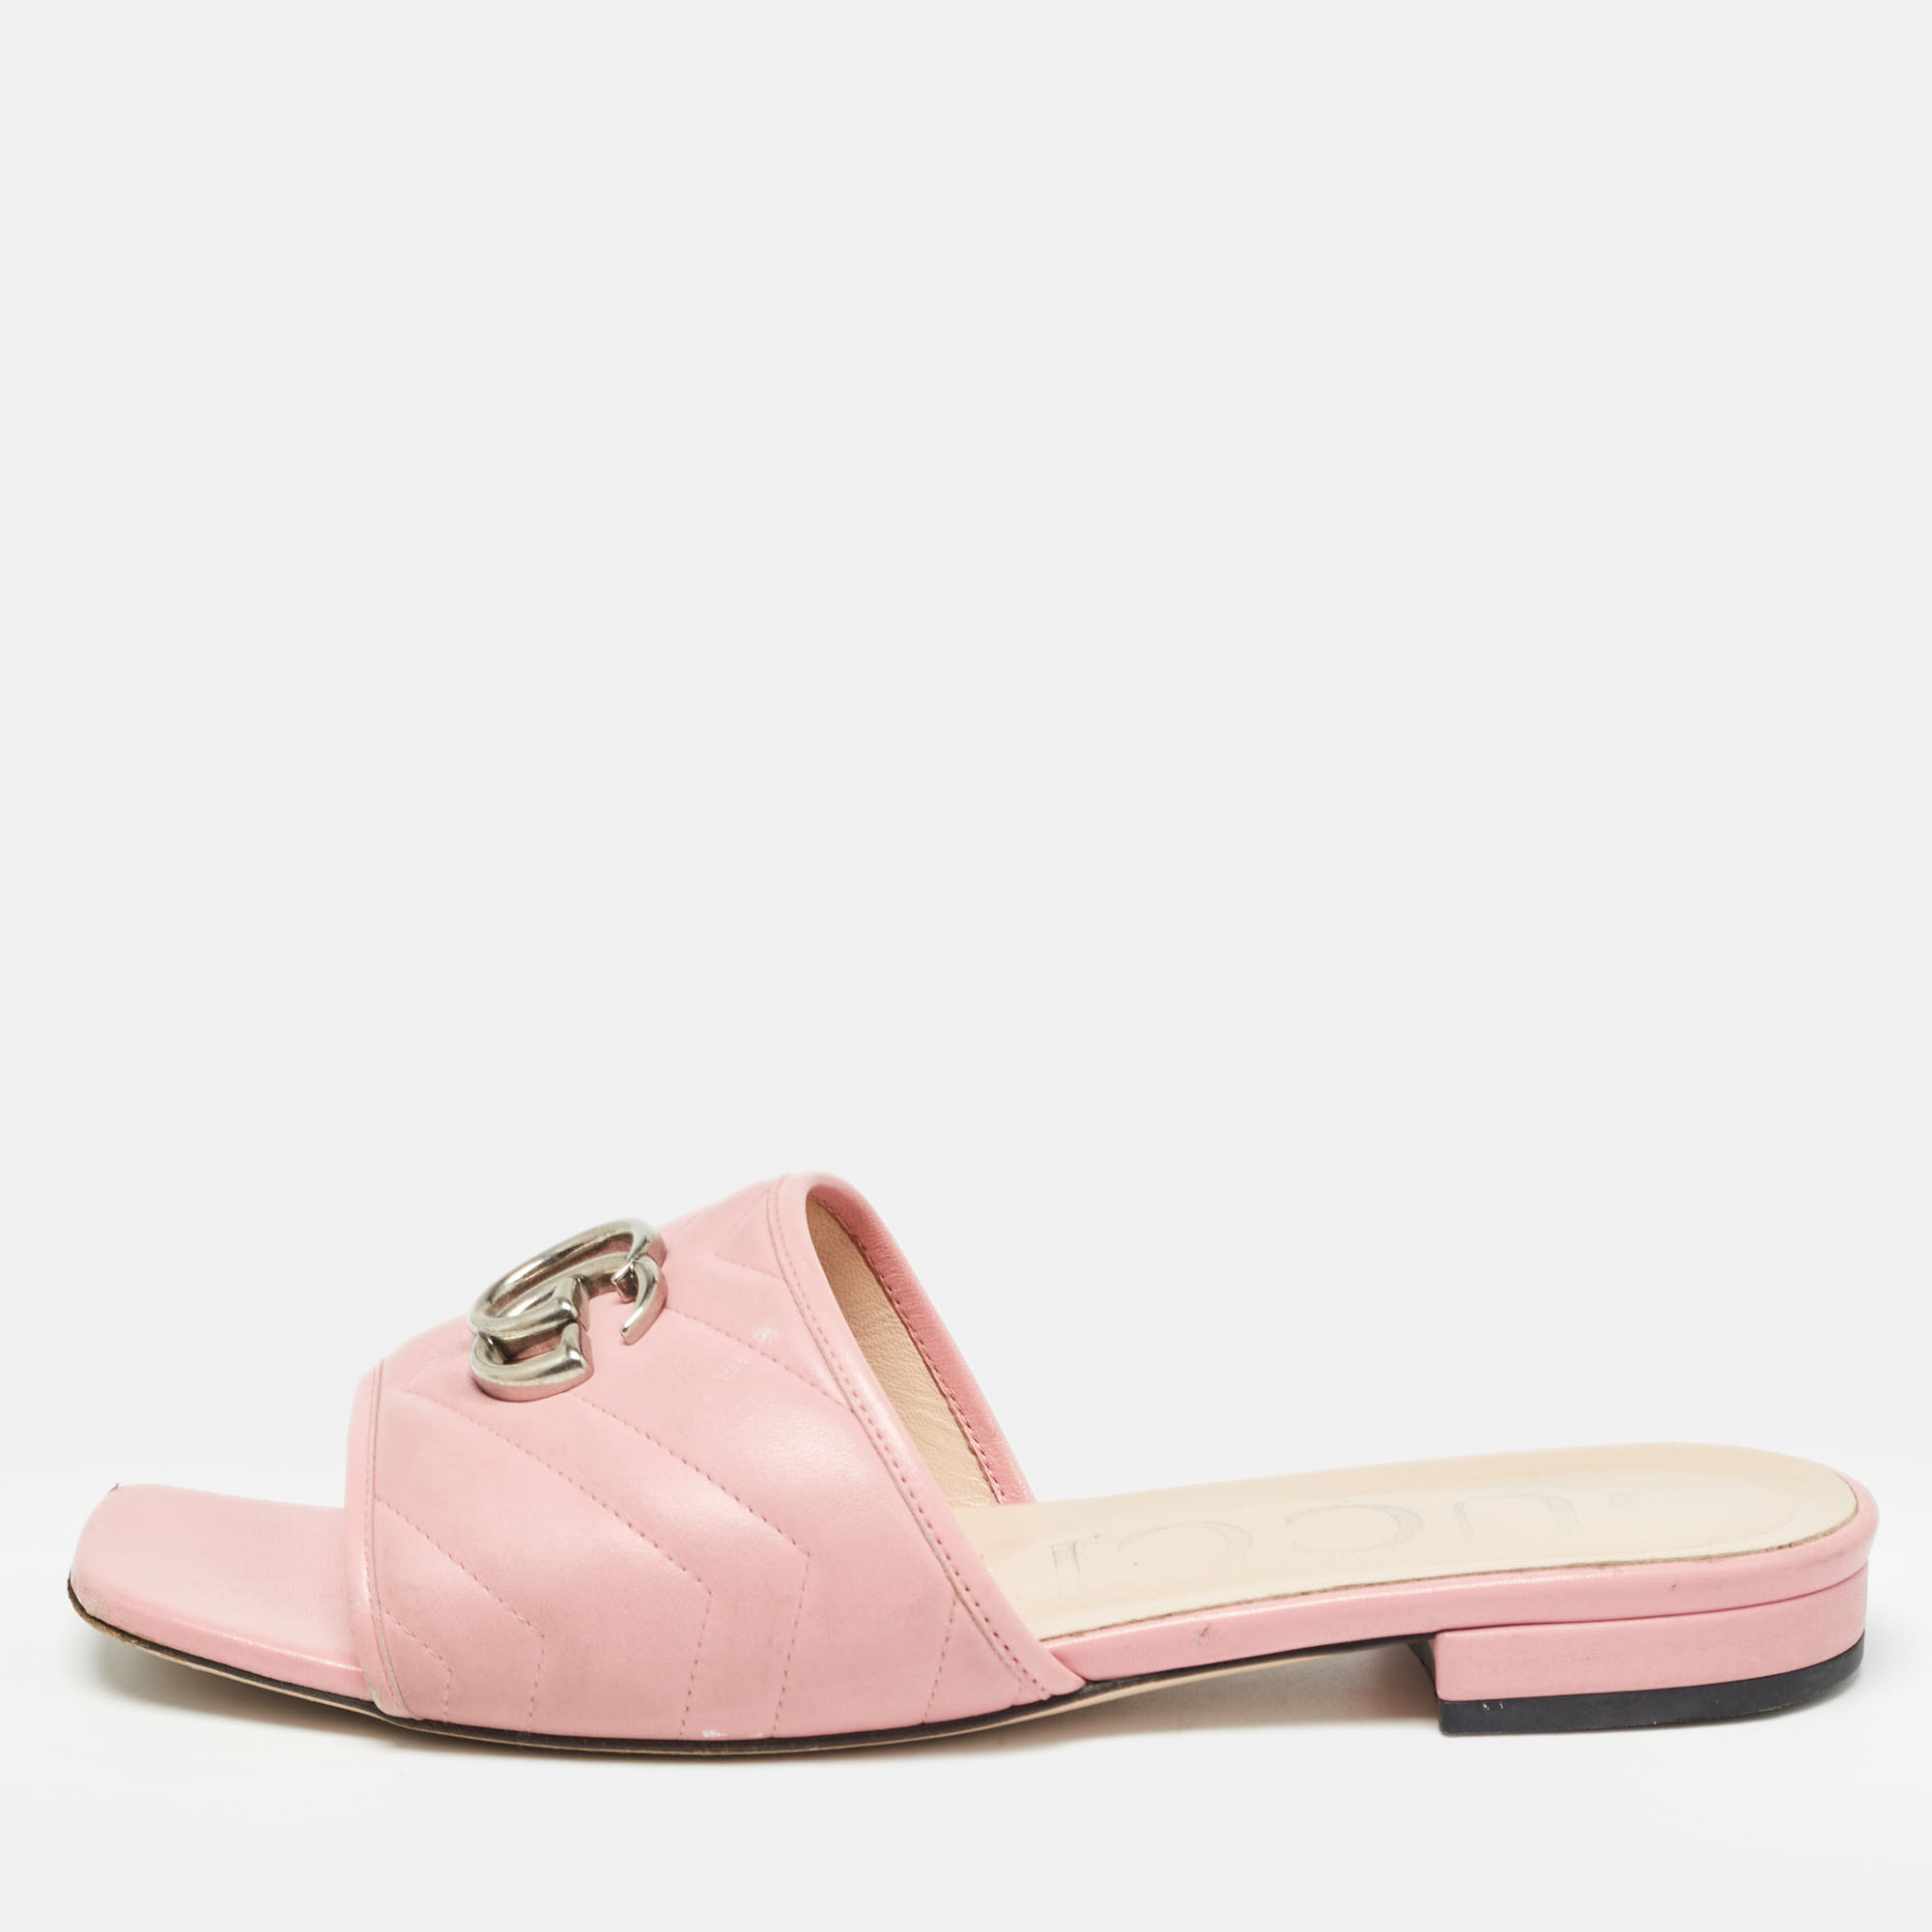 

Gucci Pink Leather GG Marmont Flat Sides Size Sandals Size